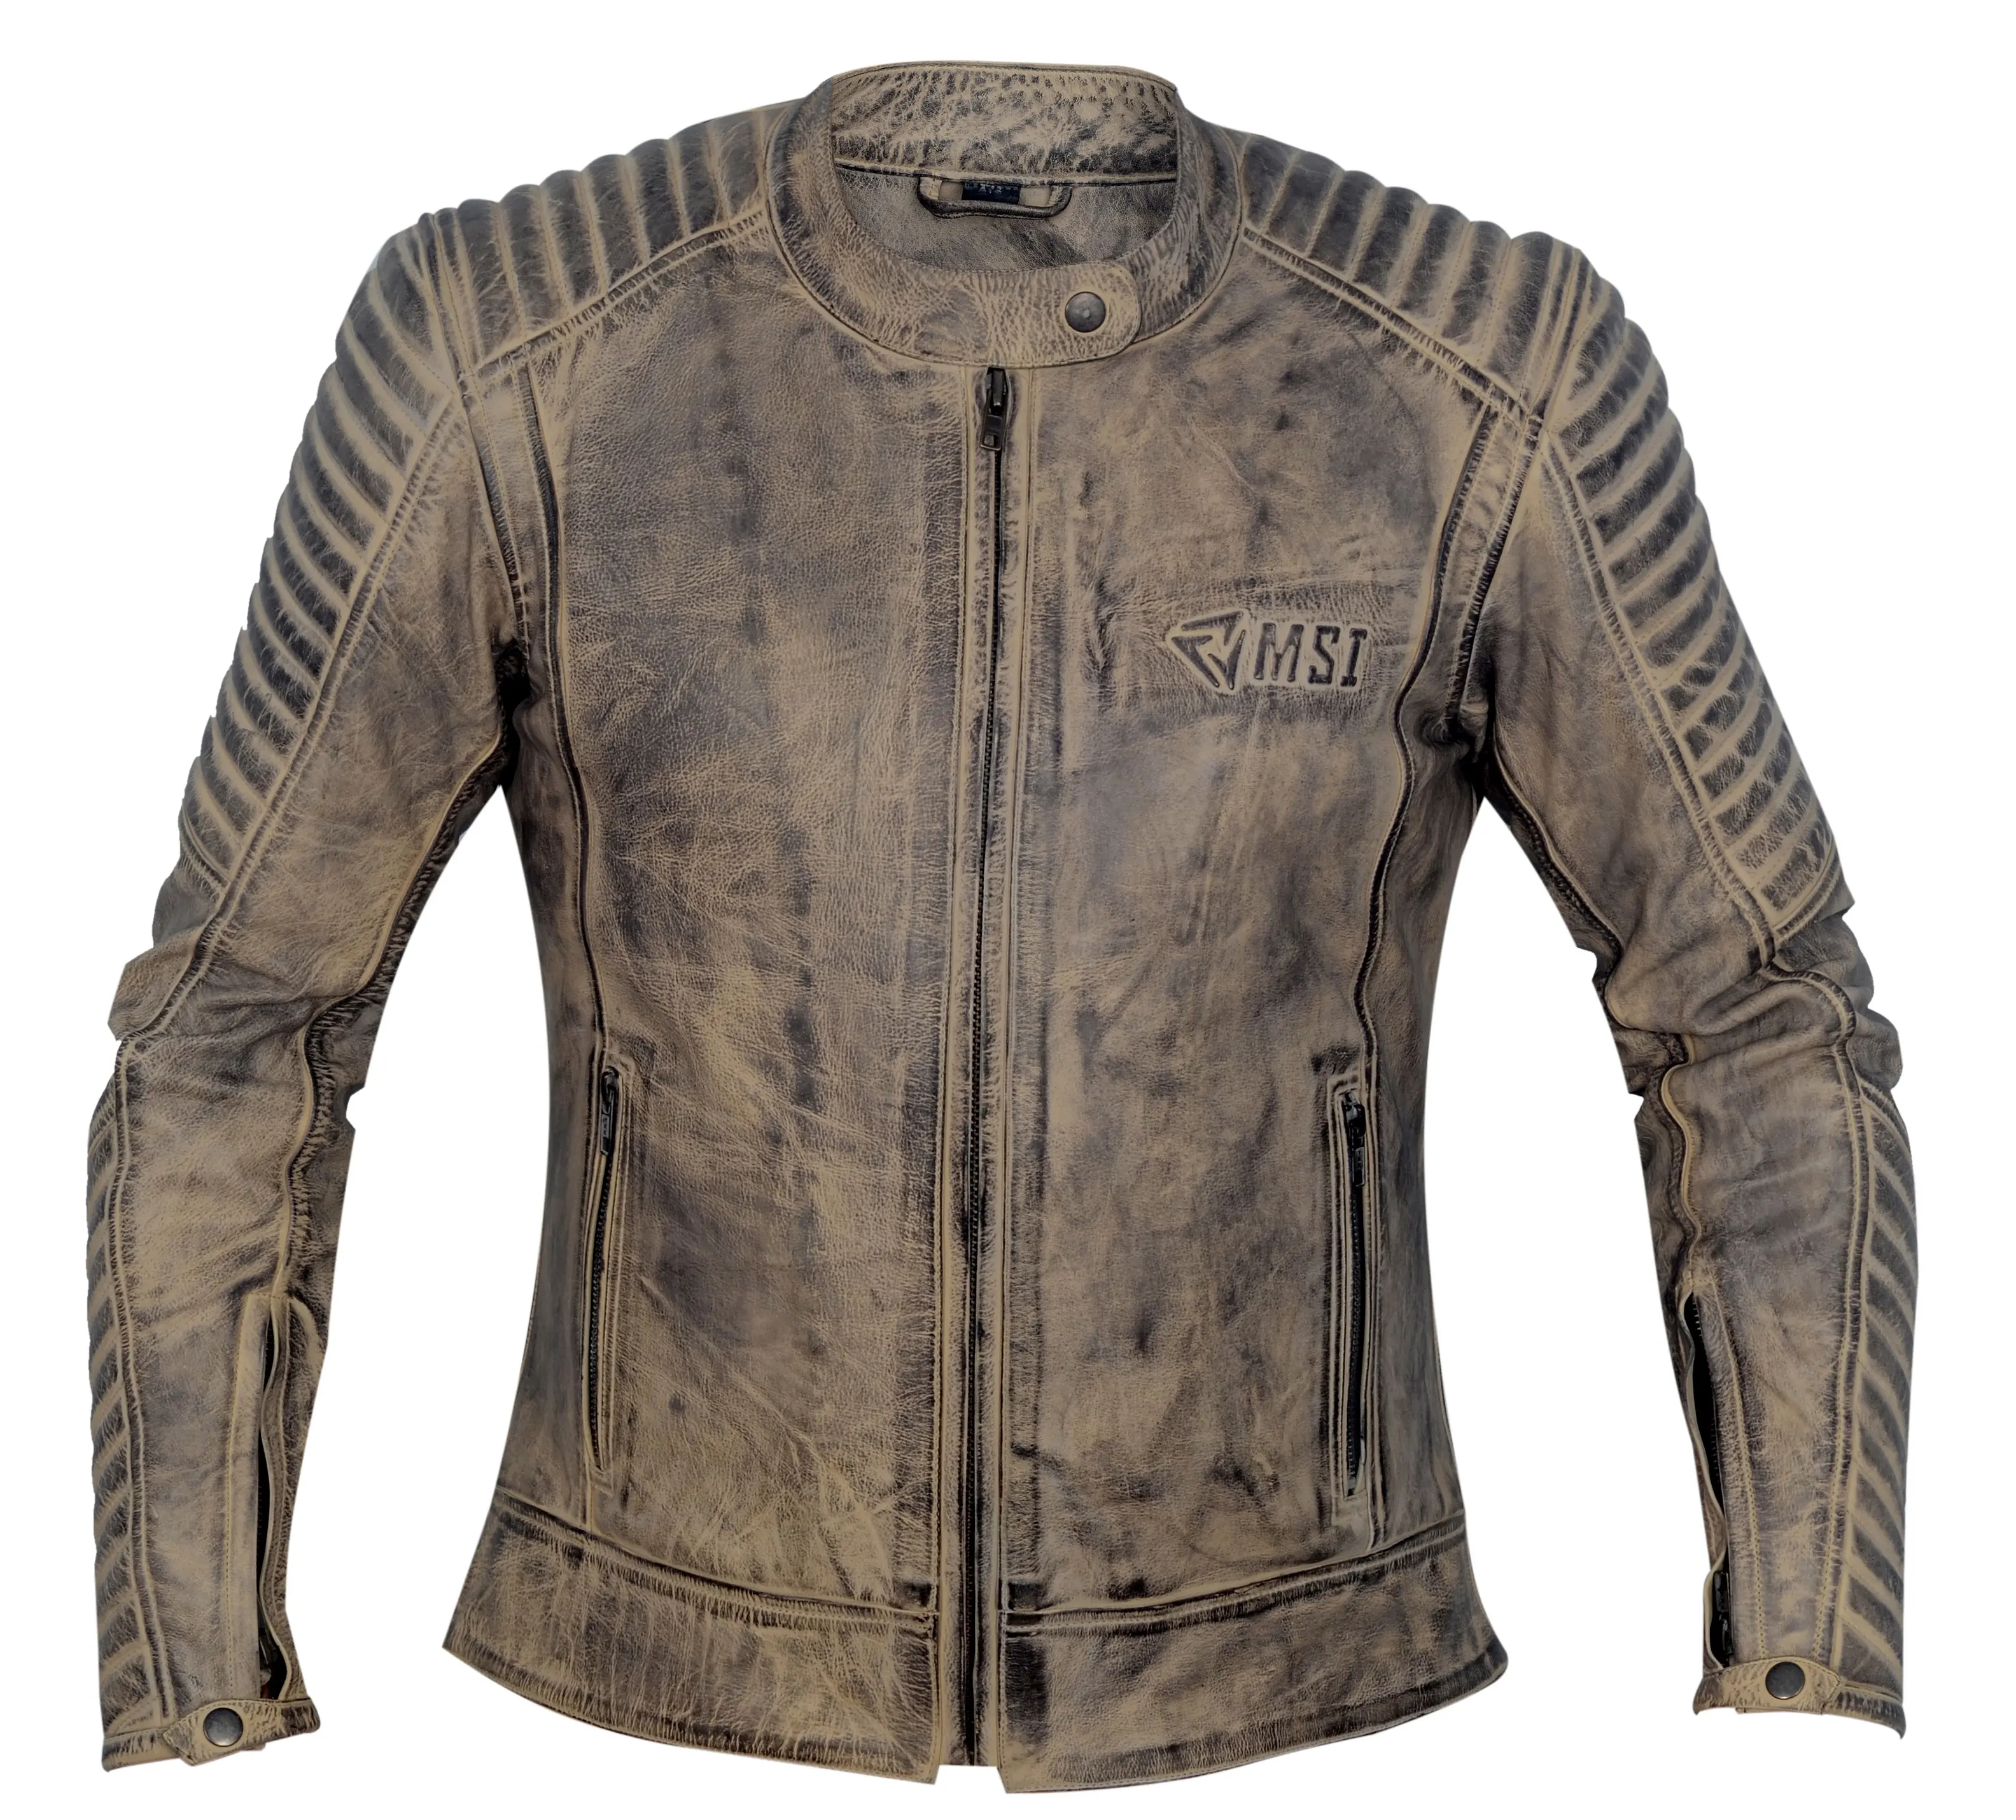 Motorcycle Clothing Women Wash and Waxed Motorbike Leather Jackets 2019 Motorcycle & Auto Racing Motorcycle Apparel Sportswear